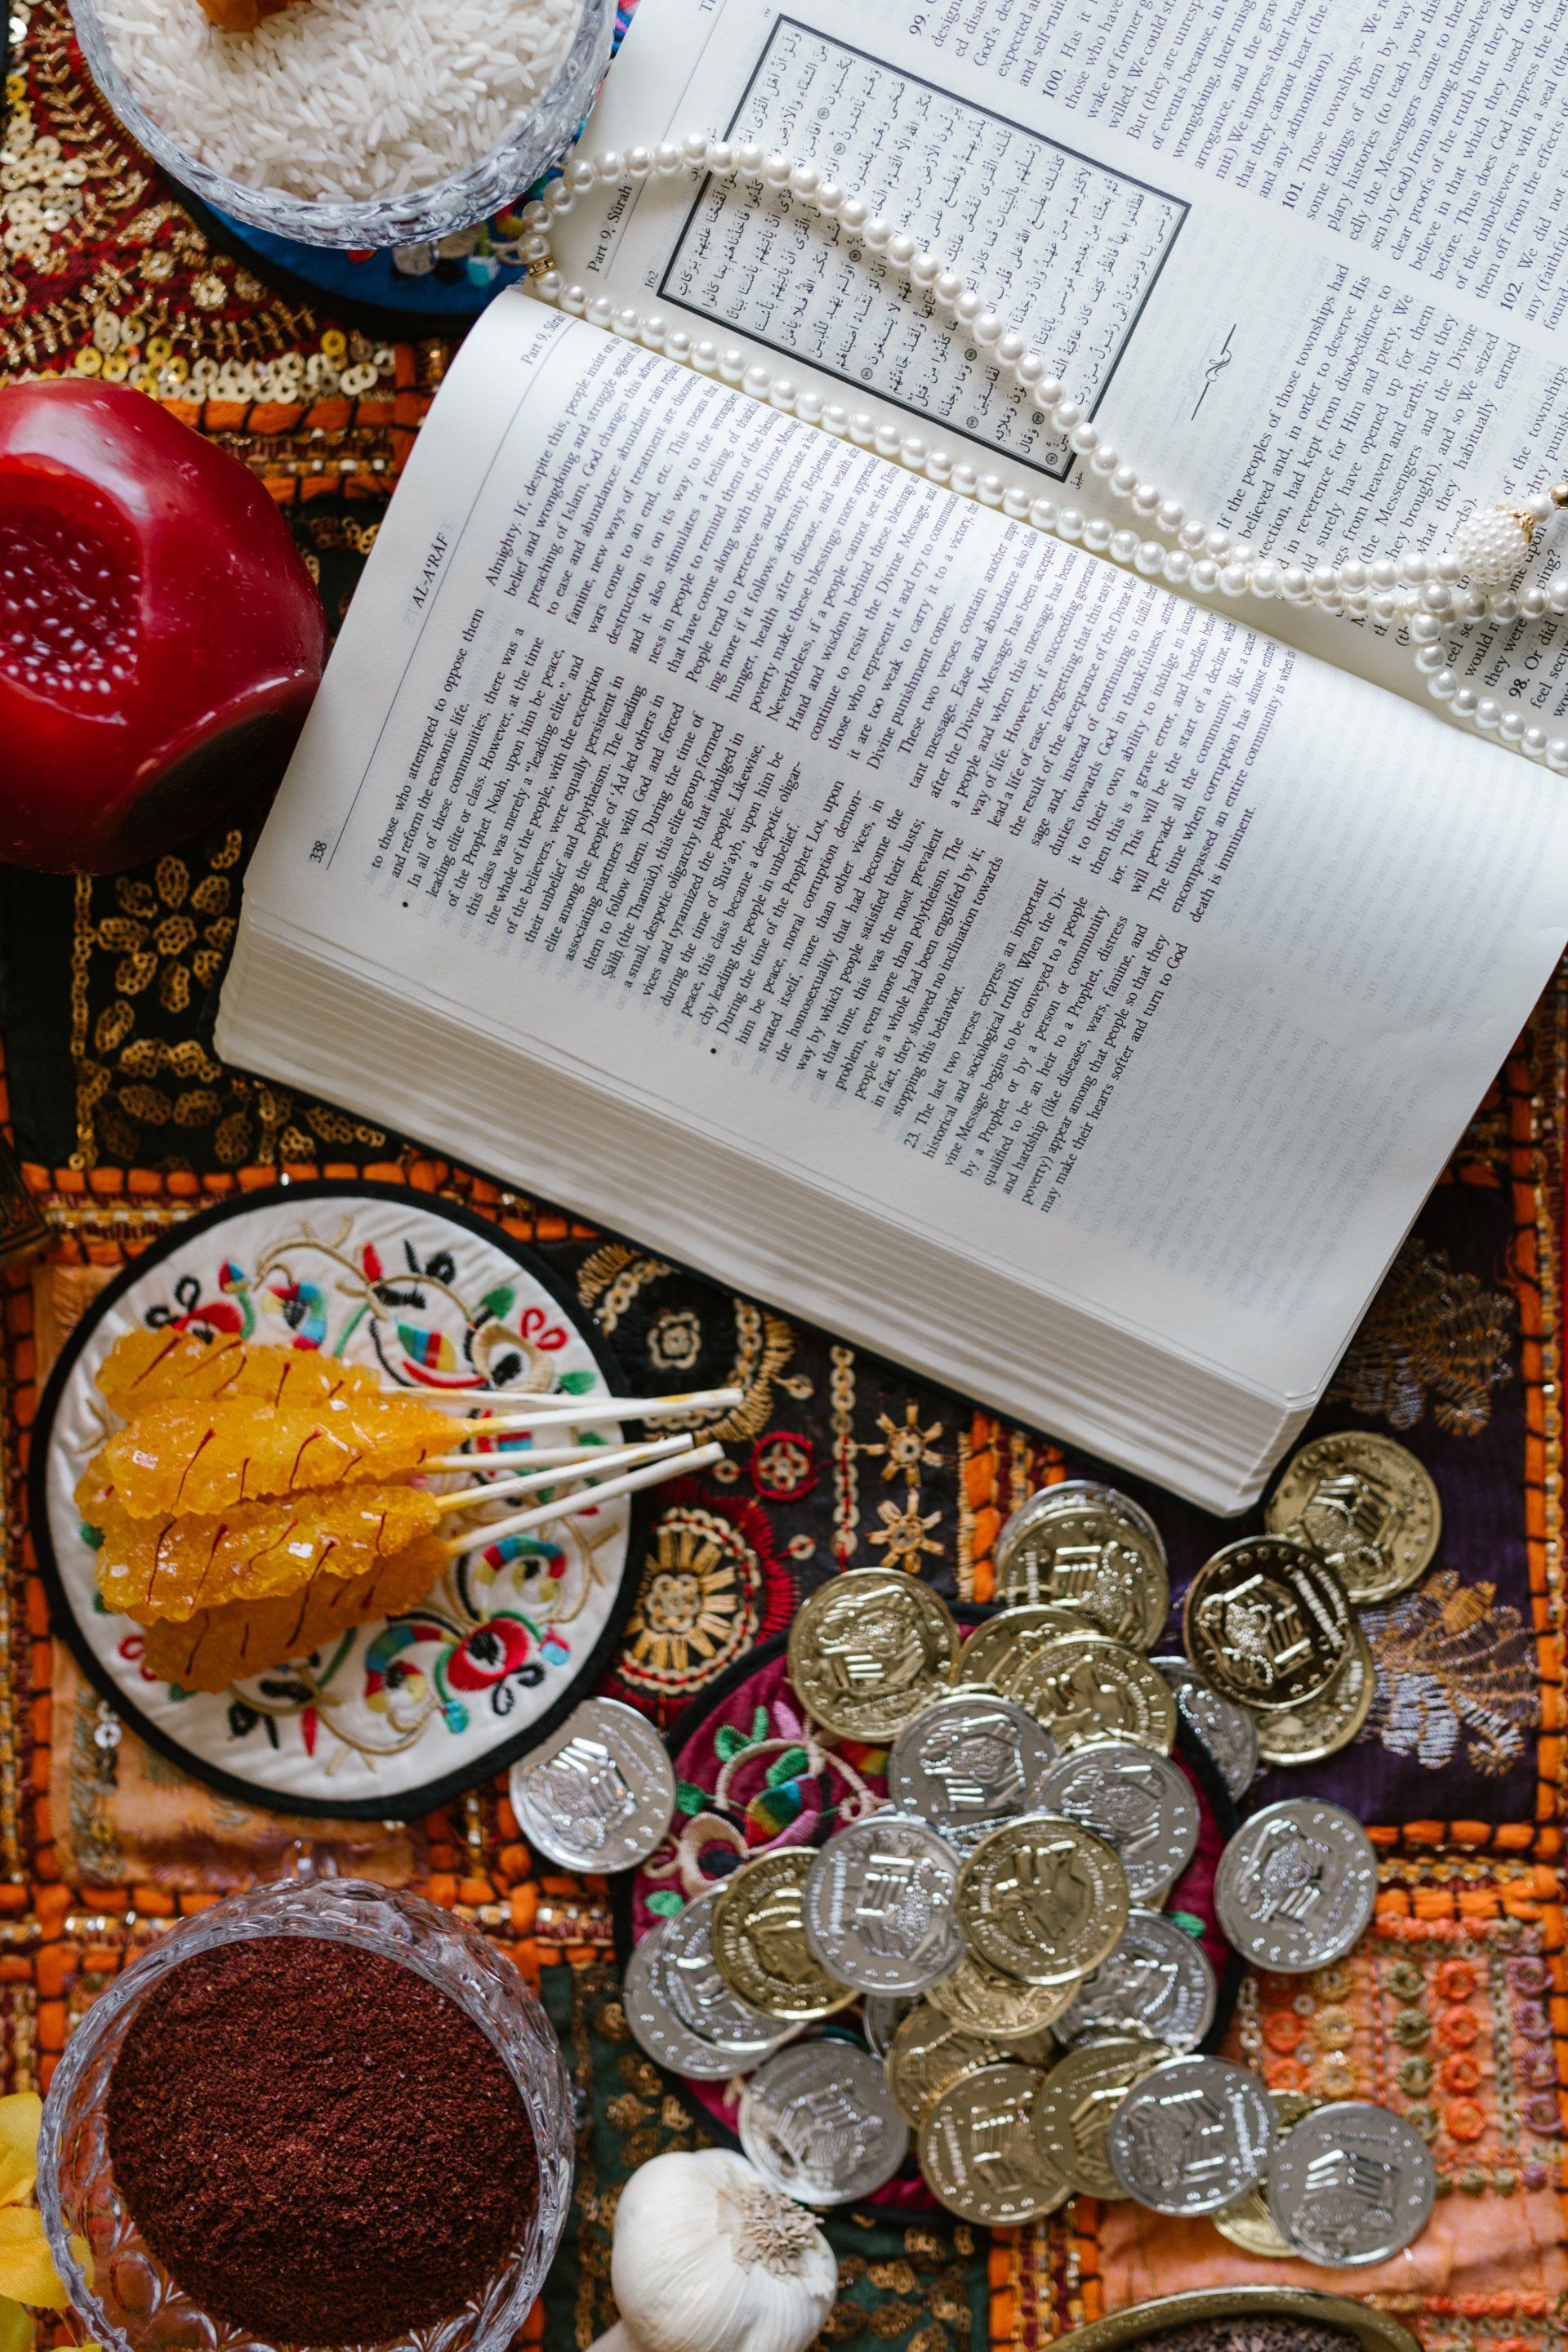 a Persian rug under a book and coins